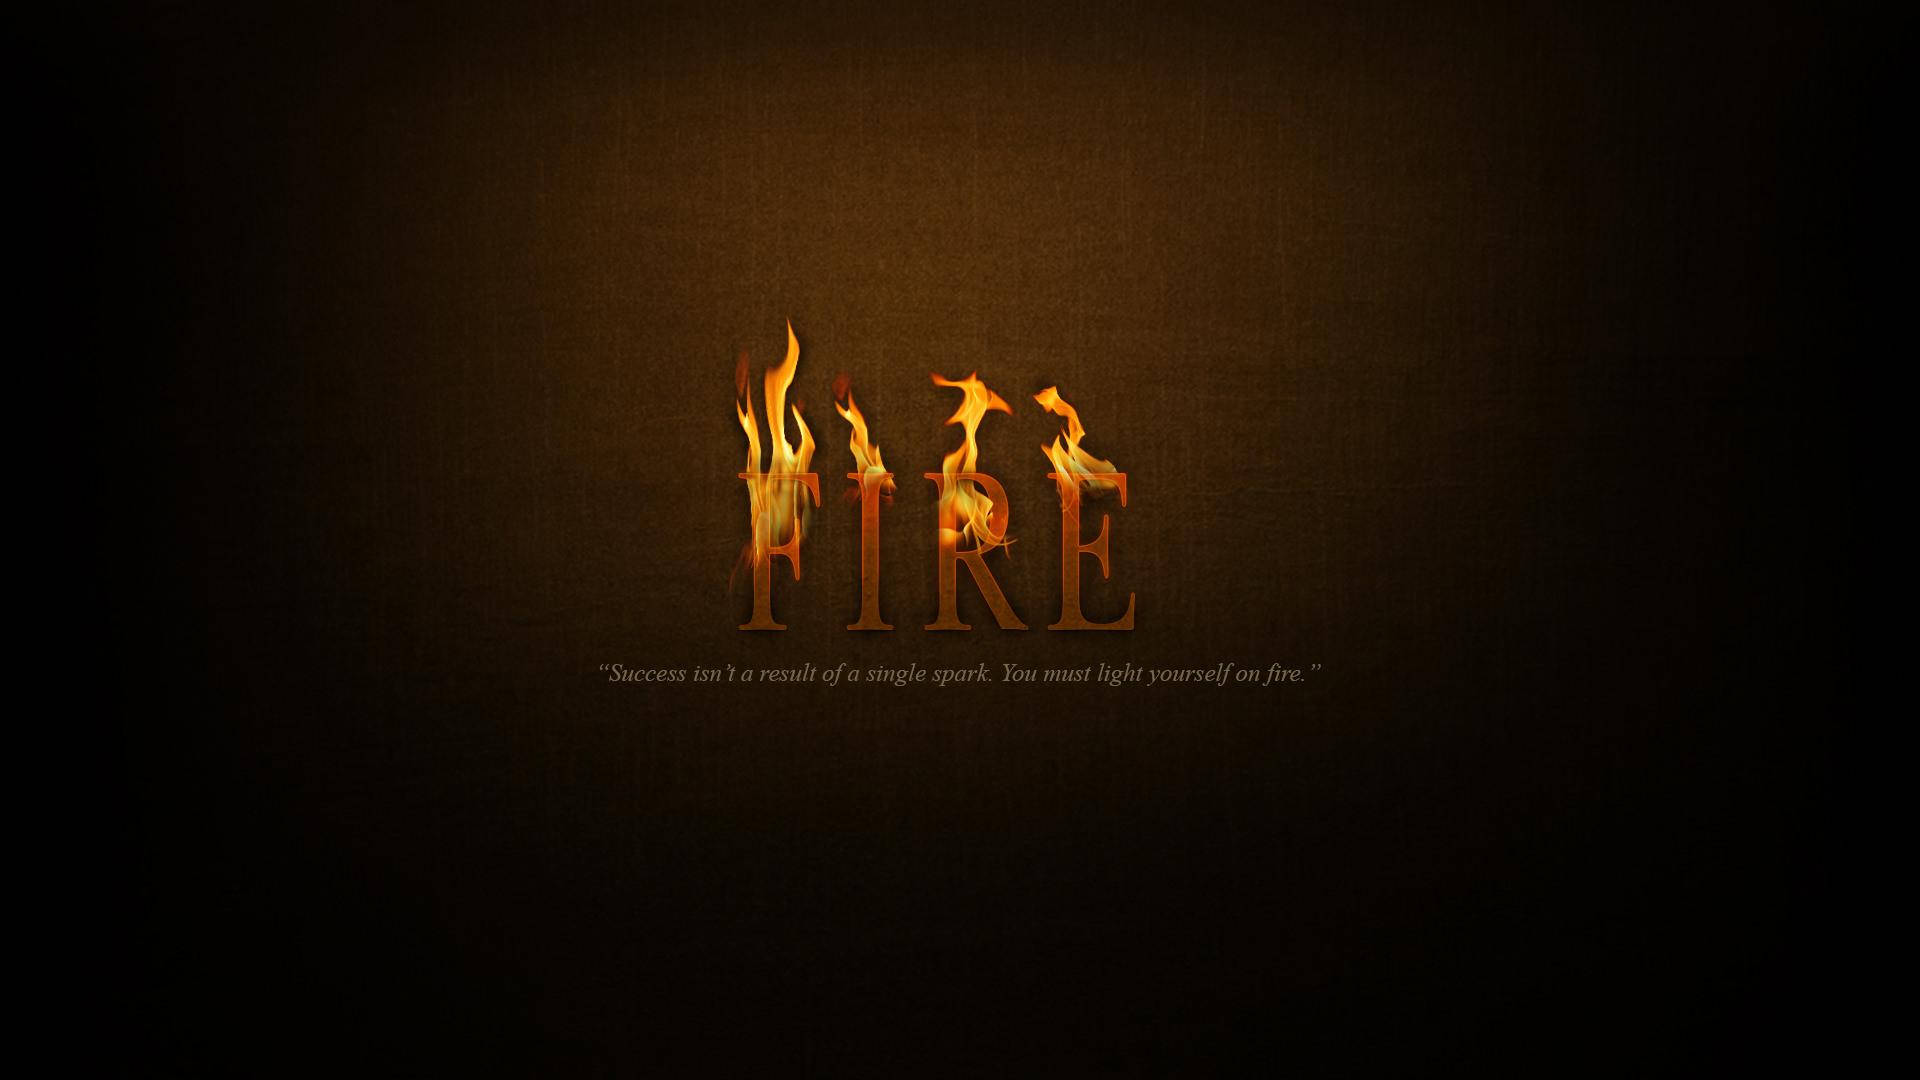 Motivational Hd Quote With Blazing Fire Background